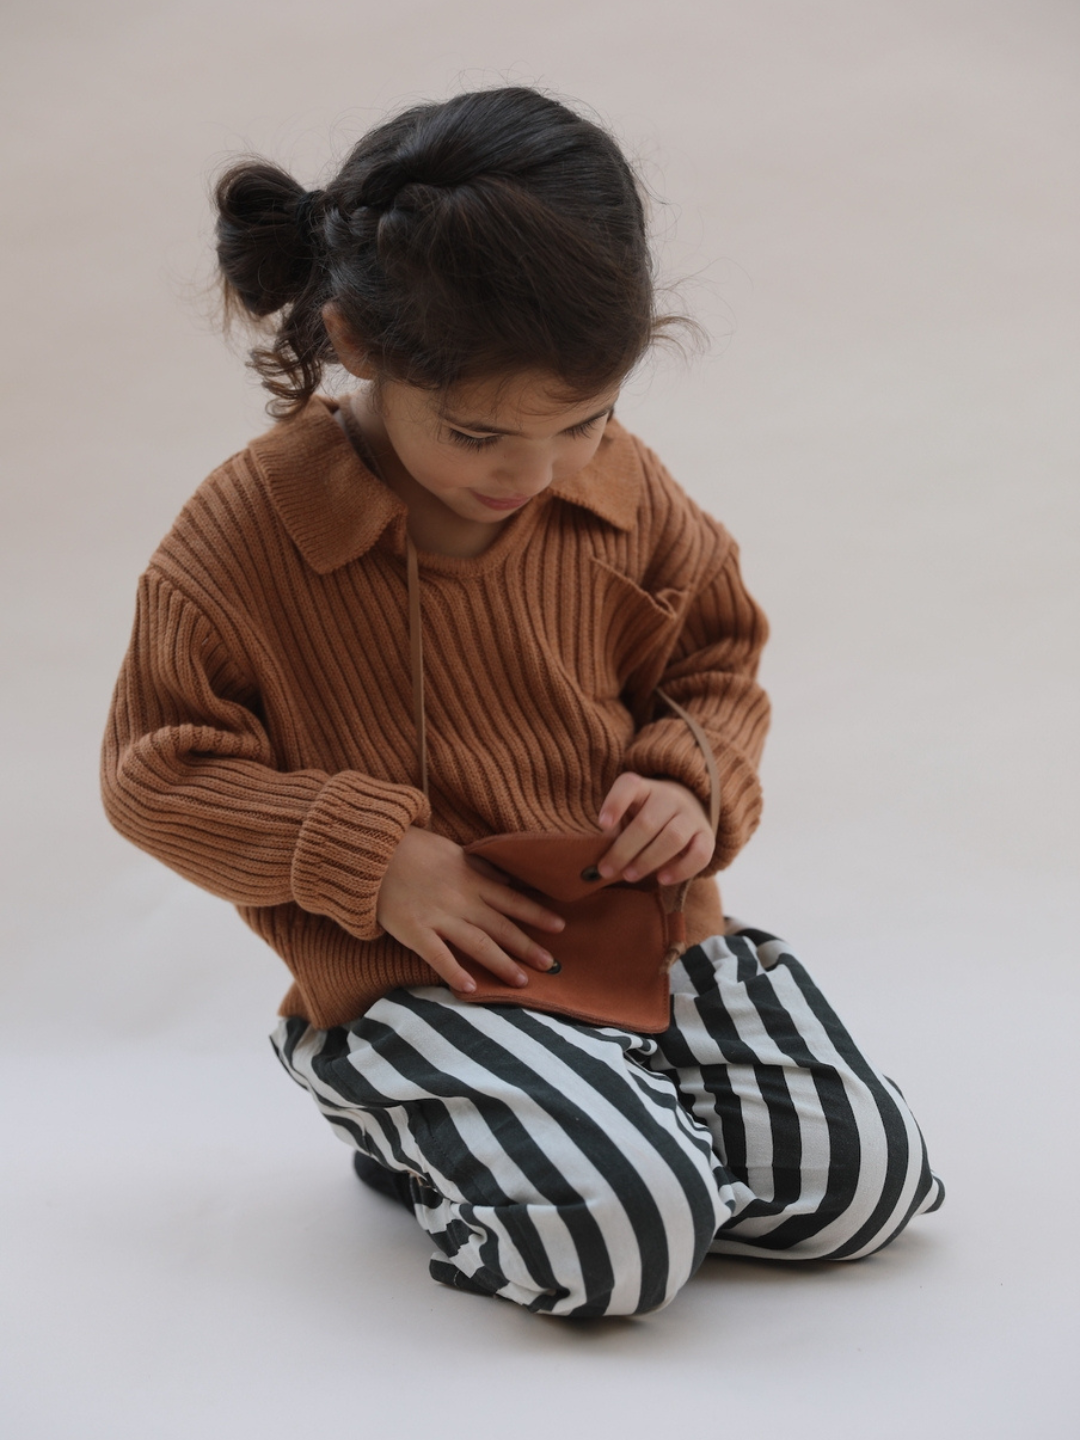 A child is wearing the black striped pant